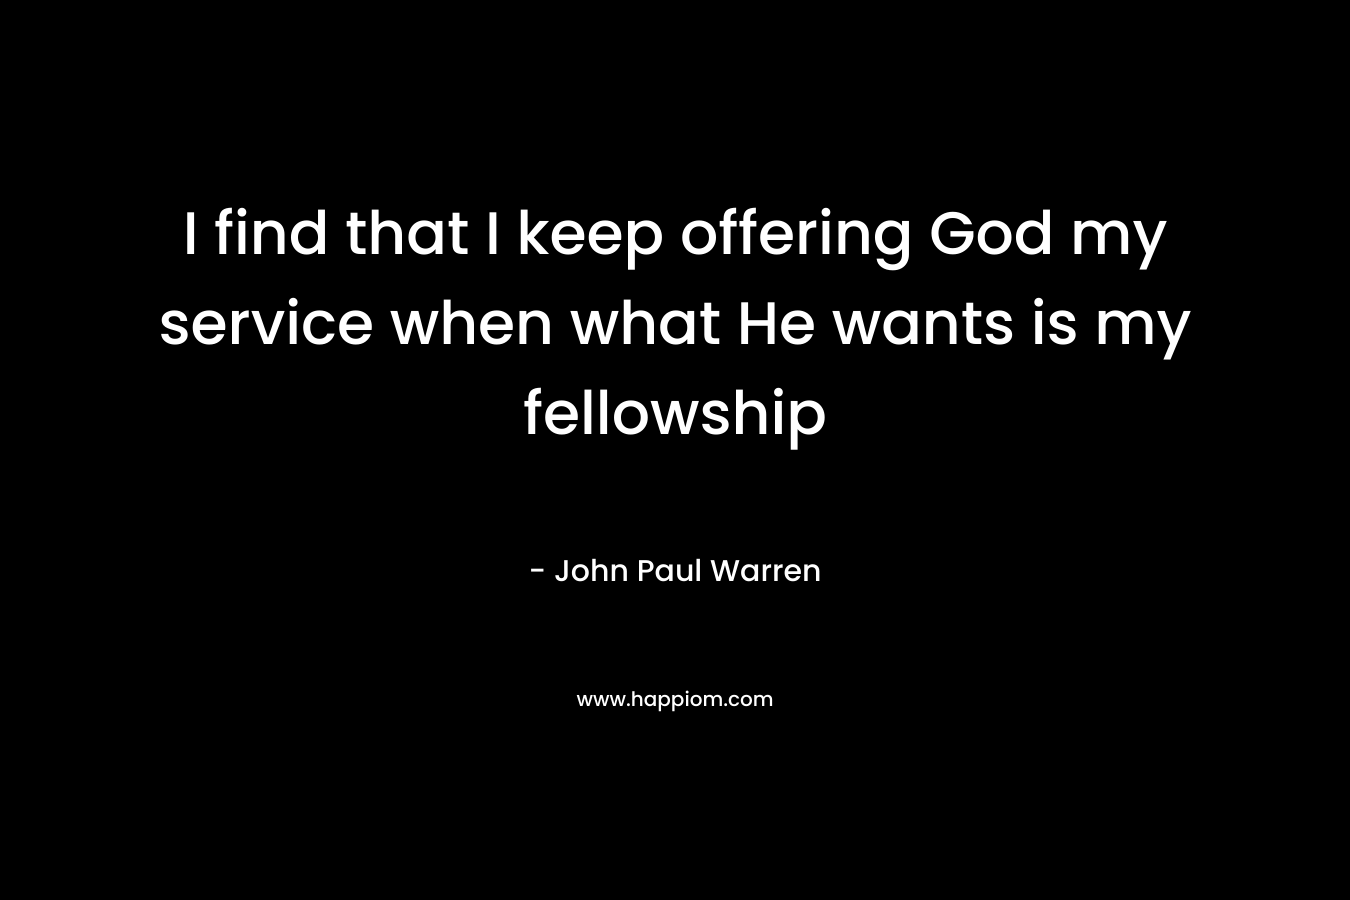 I find that I keep offering God my service when what He wants is my fellowship – John Paul Warren